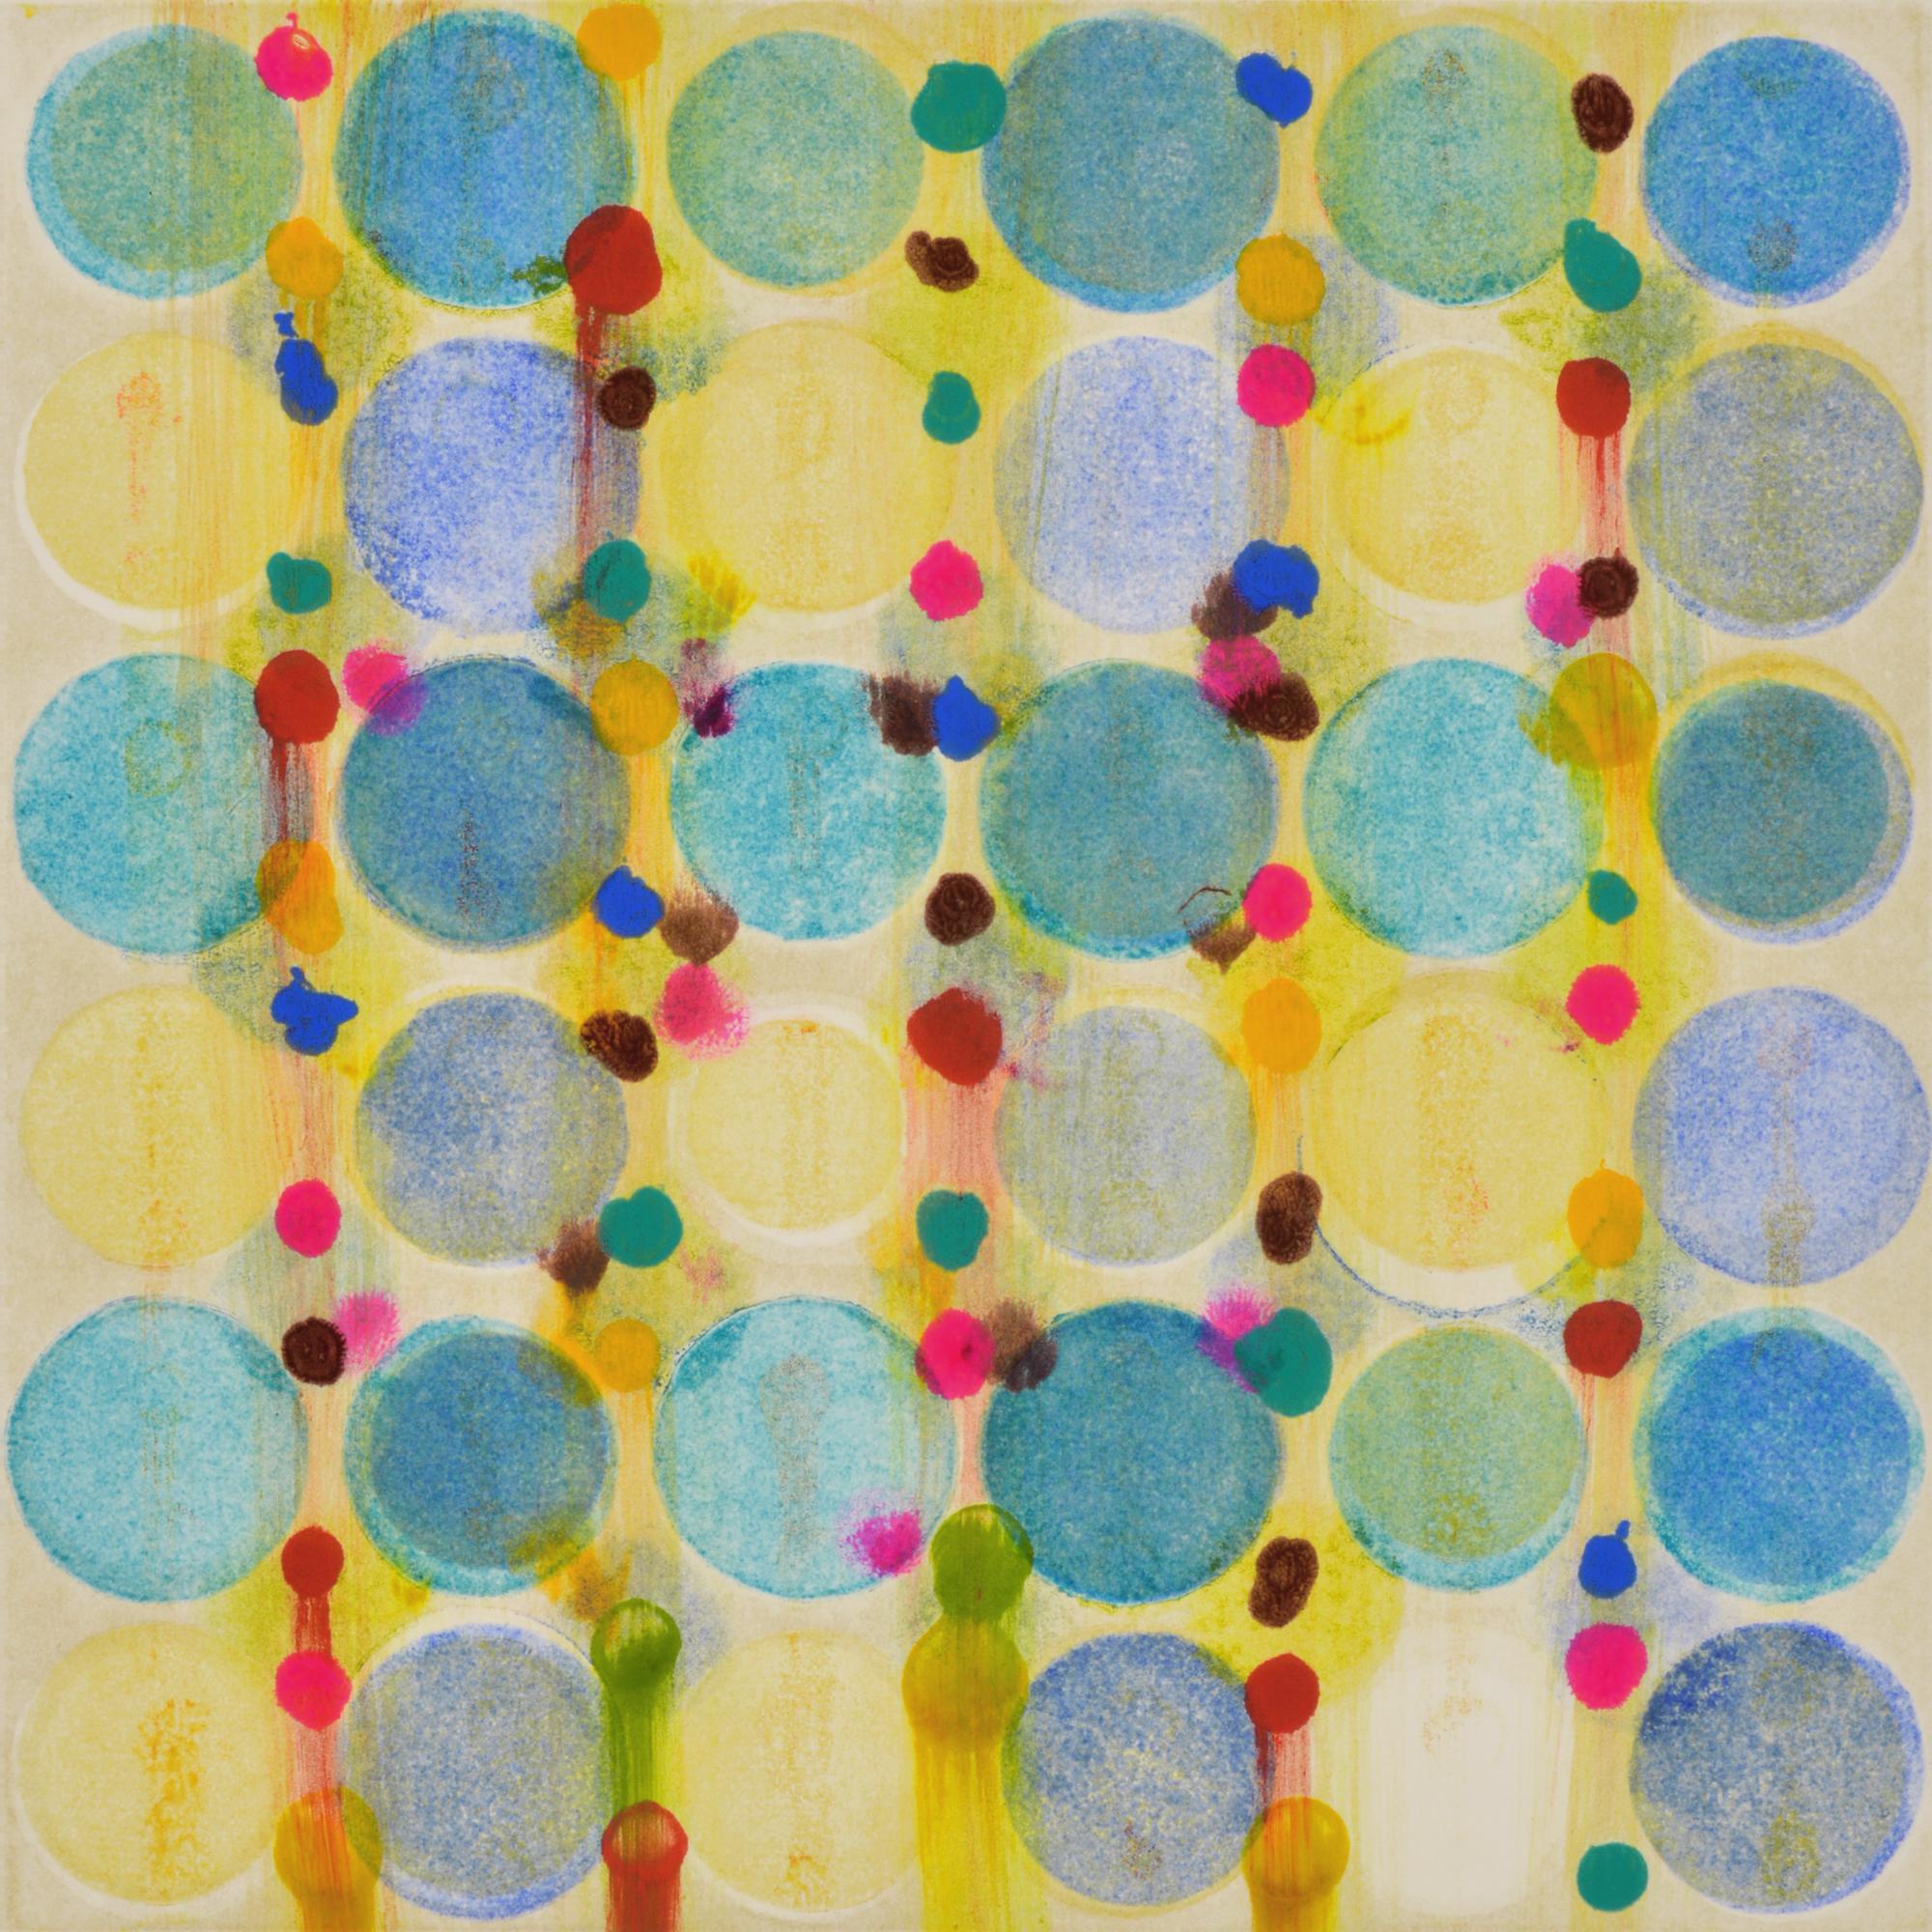 Janine Wong Abstract Print - "Dot Variant 5", color dots, abstract, teal, yellow, pink, yellow, green, blue